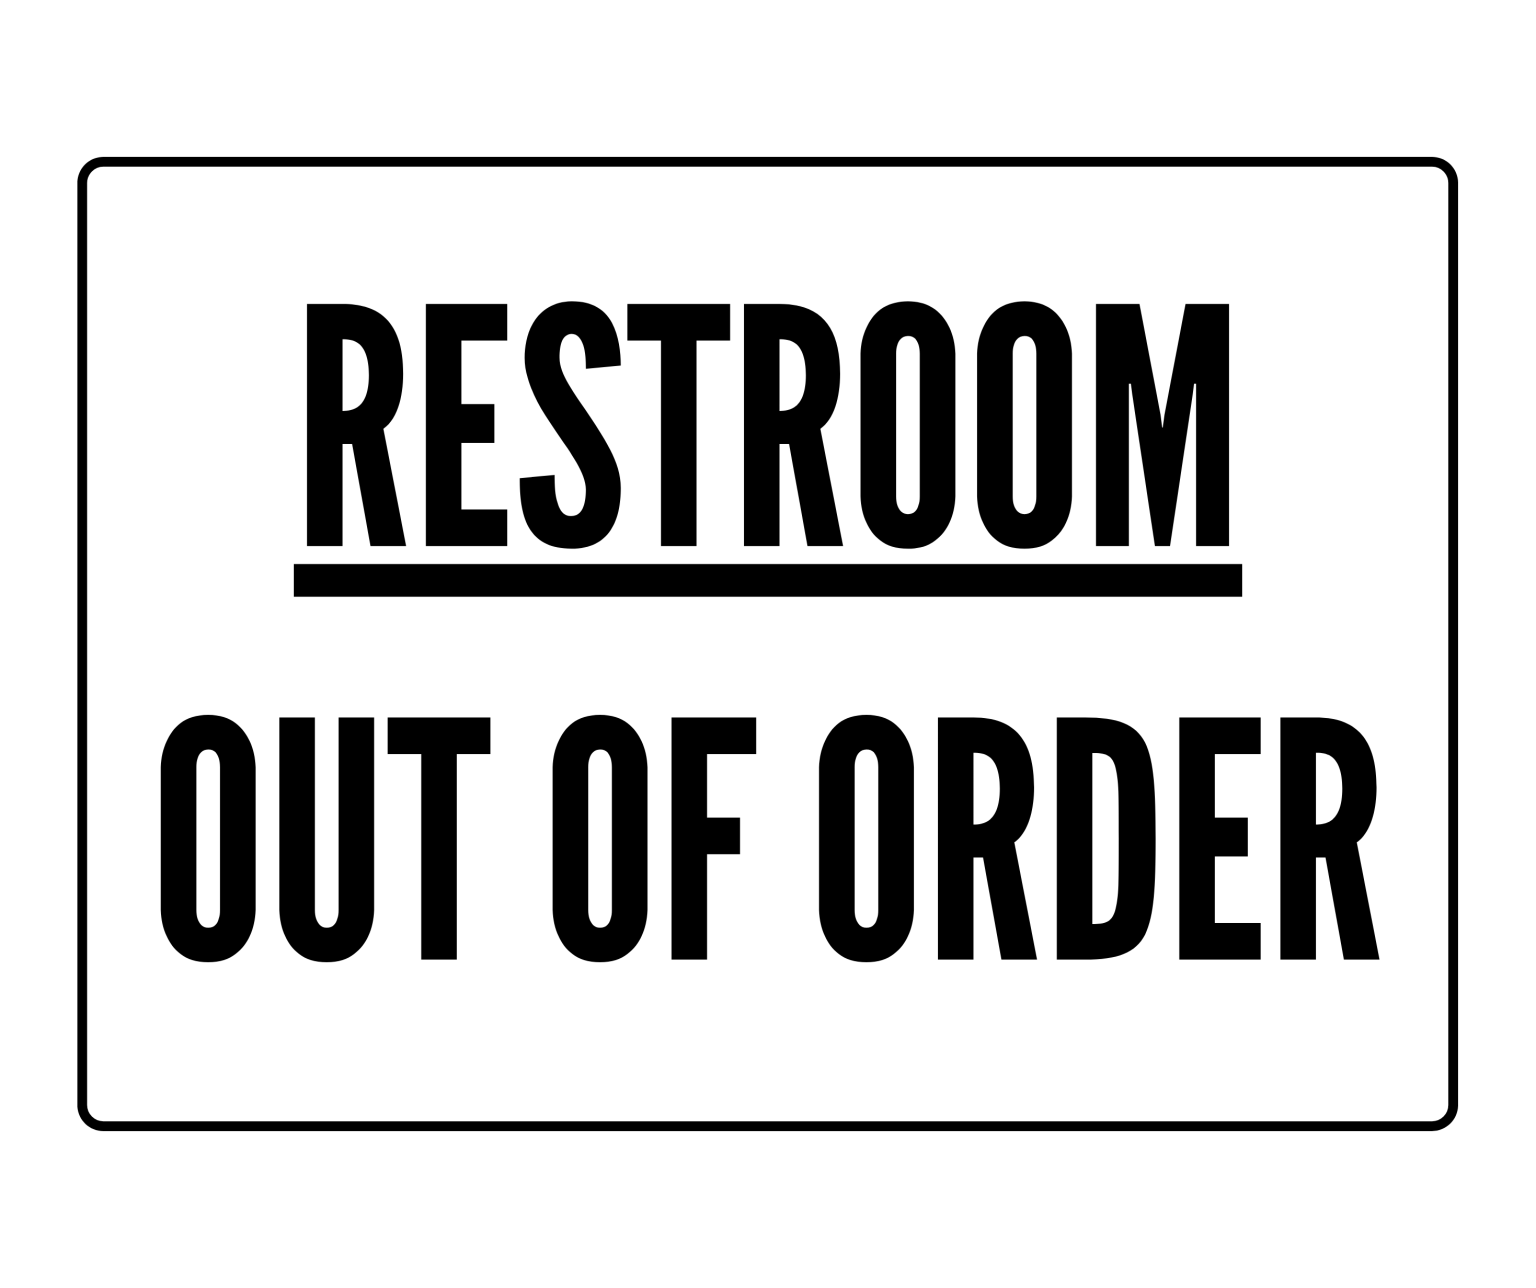 restroom-out-of-order-sign-printable-templates-free-pdf-downloads